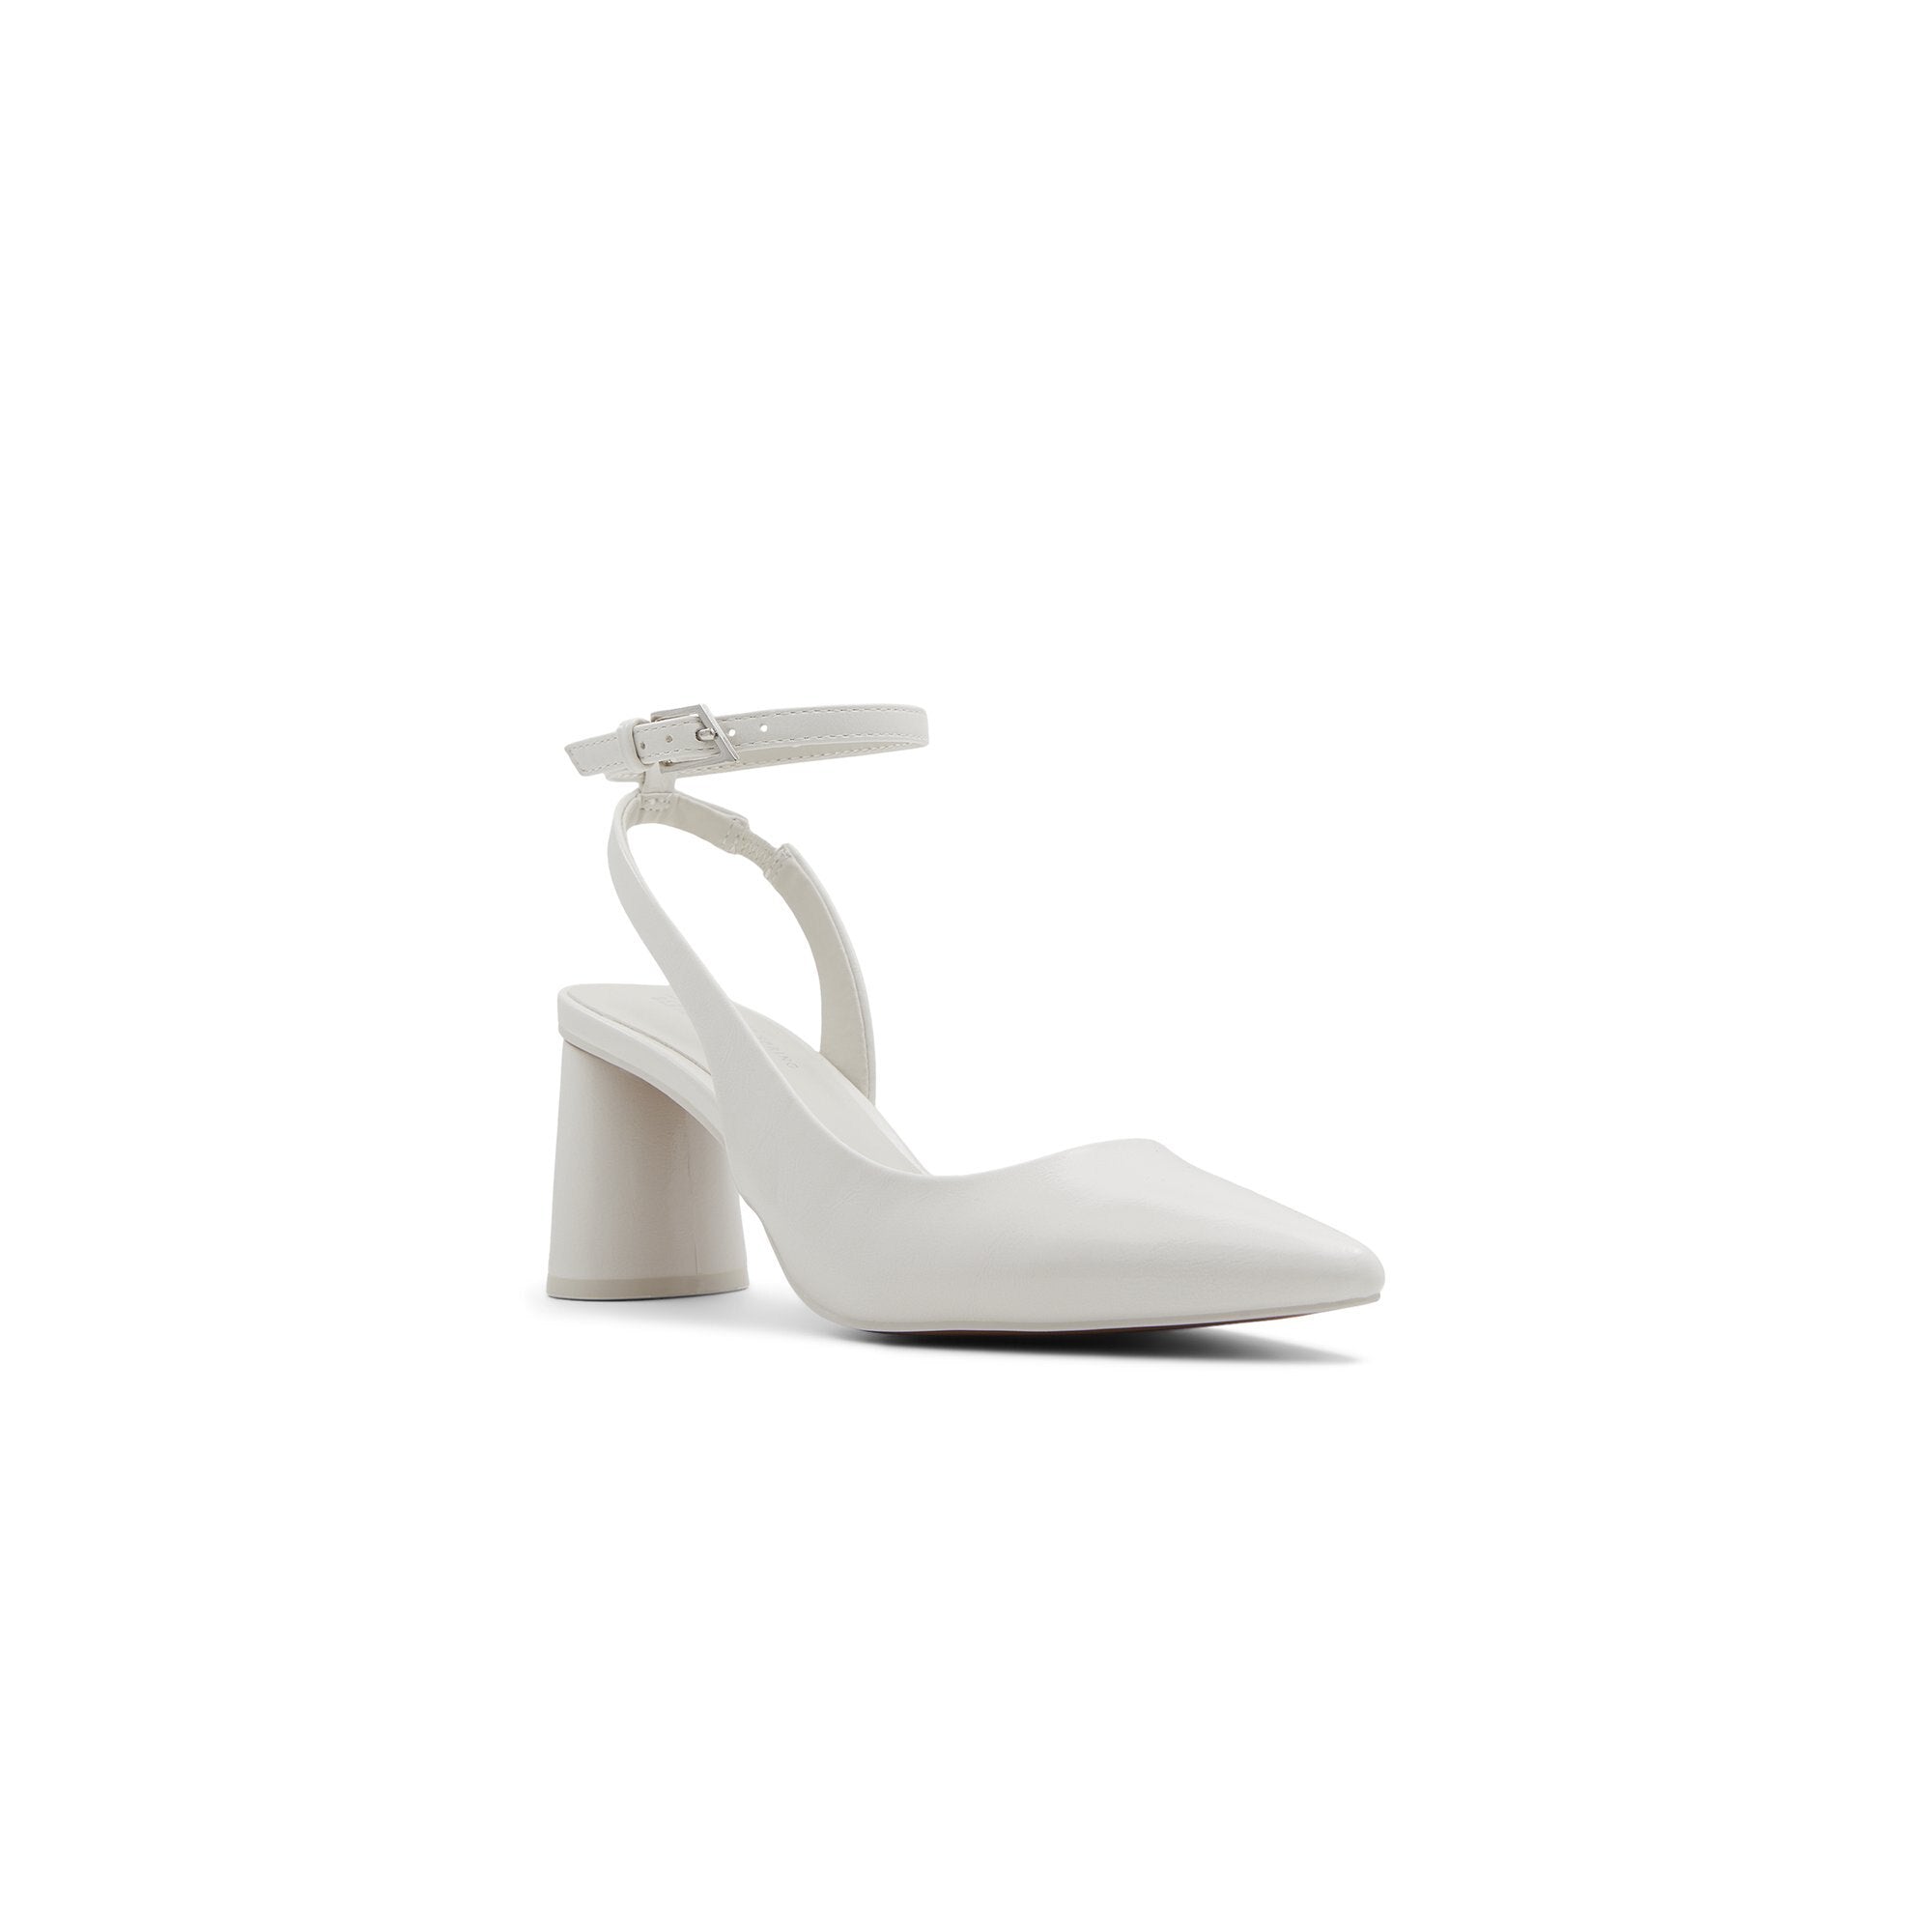 Rendezvous Women Shoes - Ice - CALL IT SPRING KSA